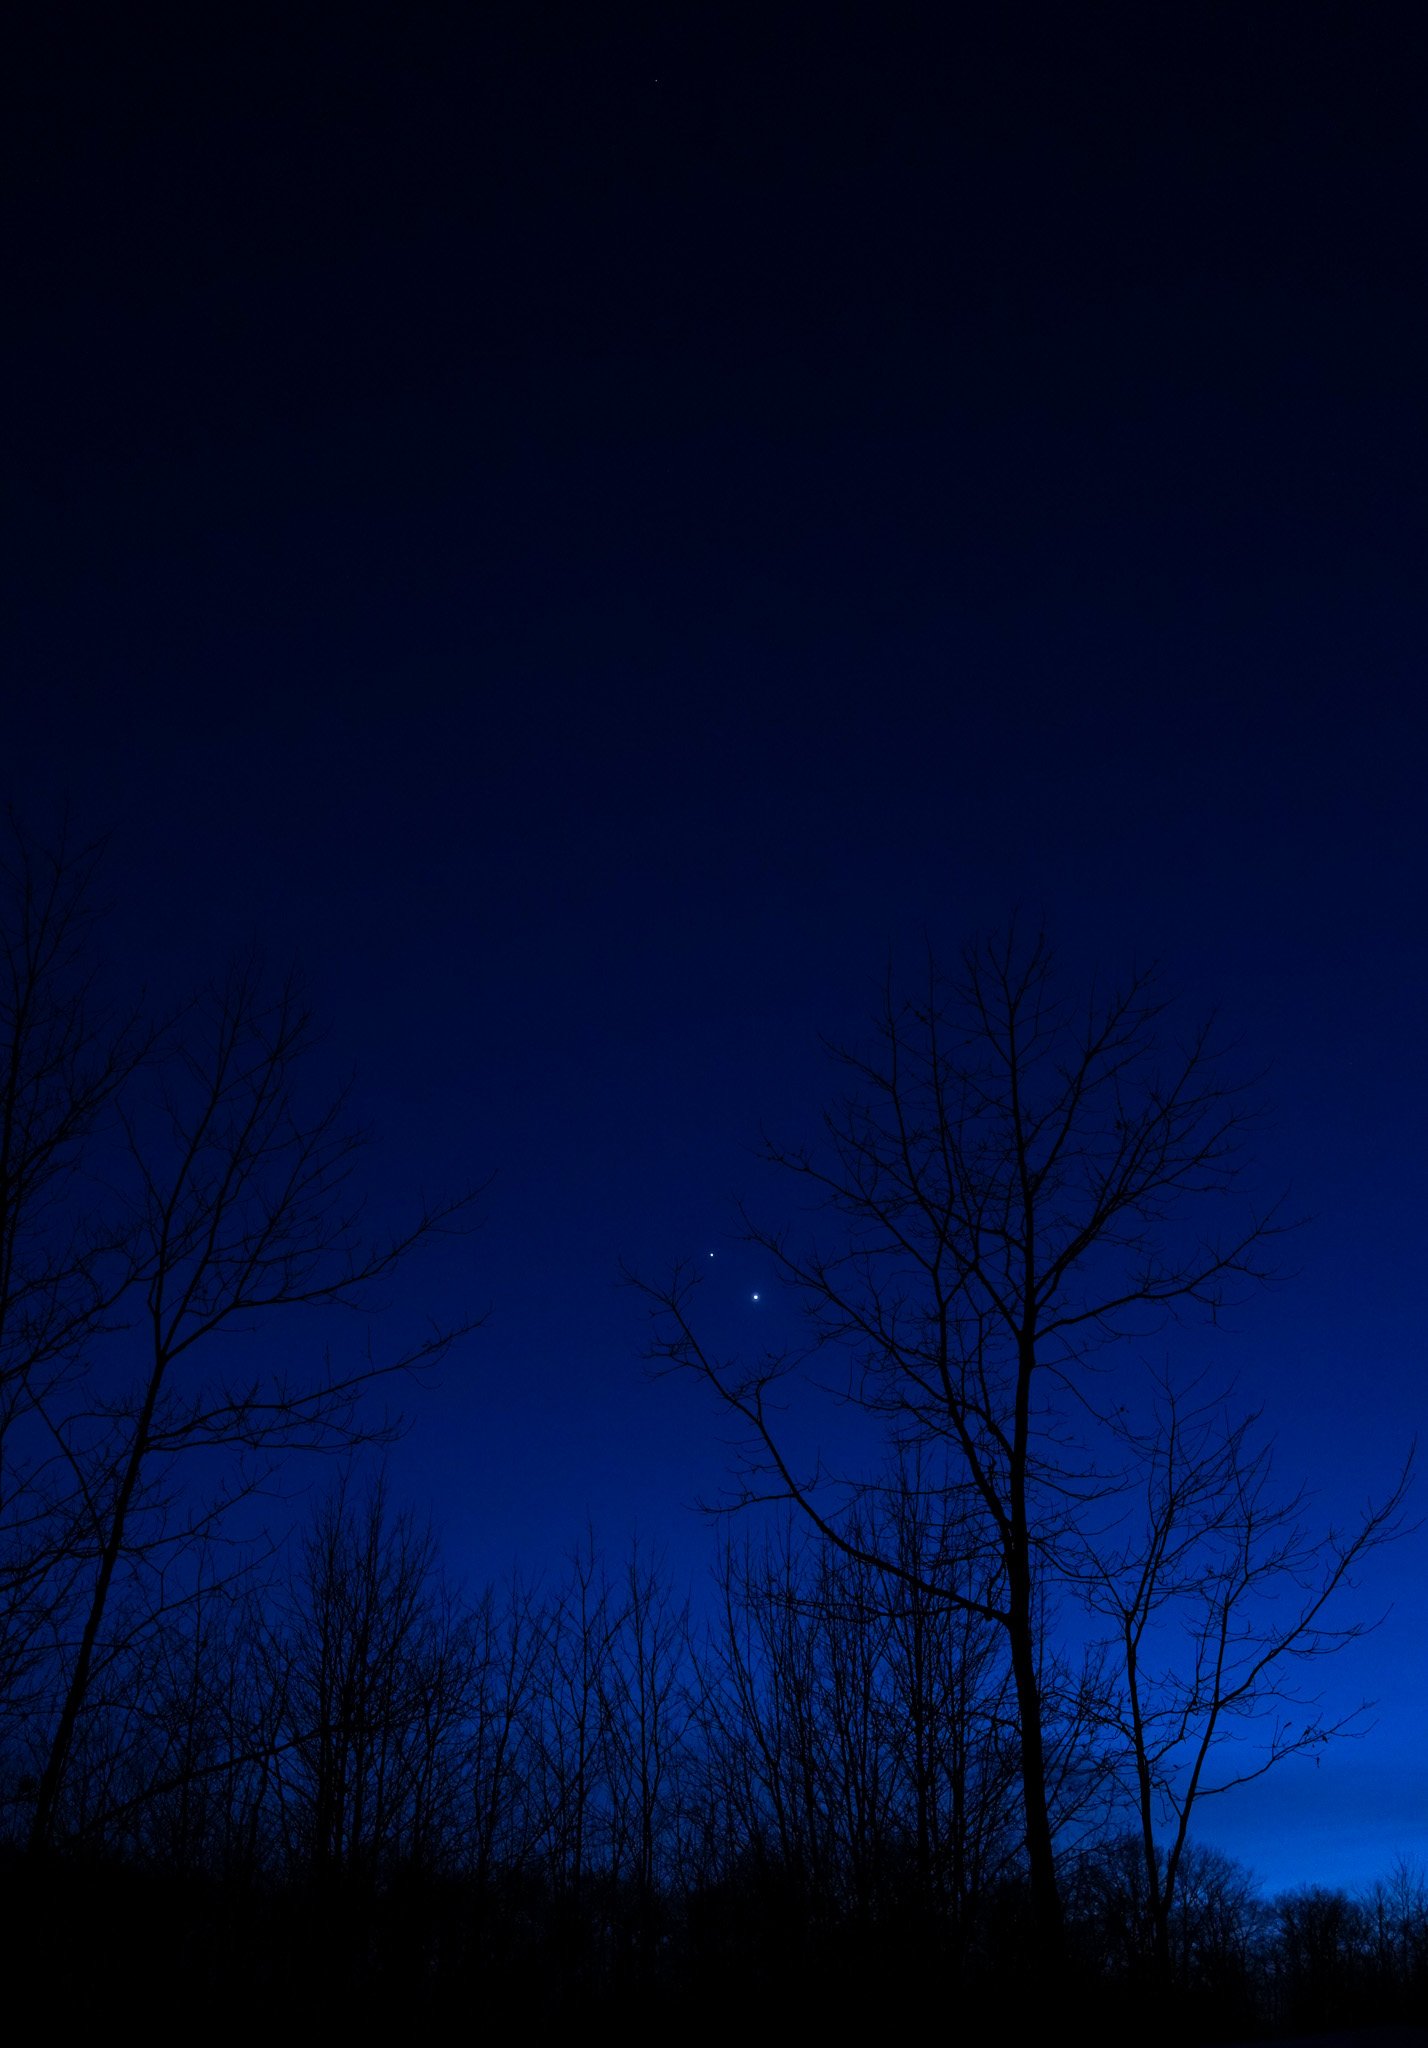 Jupiter + Venus, A Rare Kiss │ I am witness to a conjunction of planets, 400 million miles apart │ Bayfield, WI